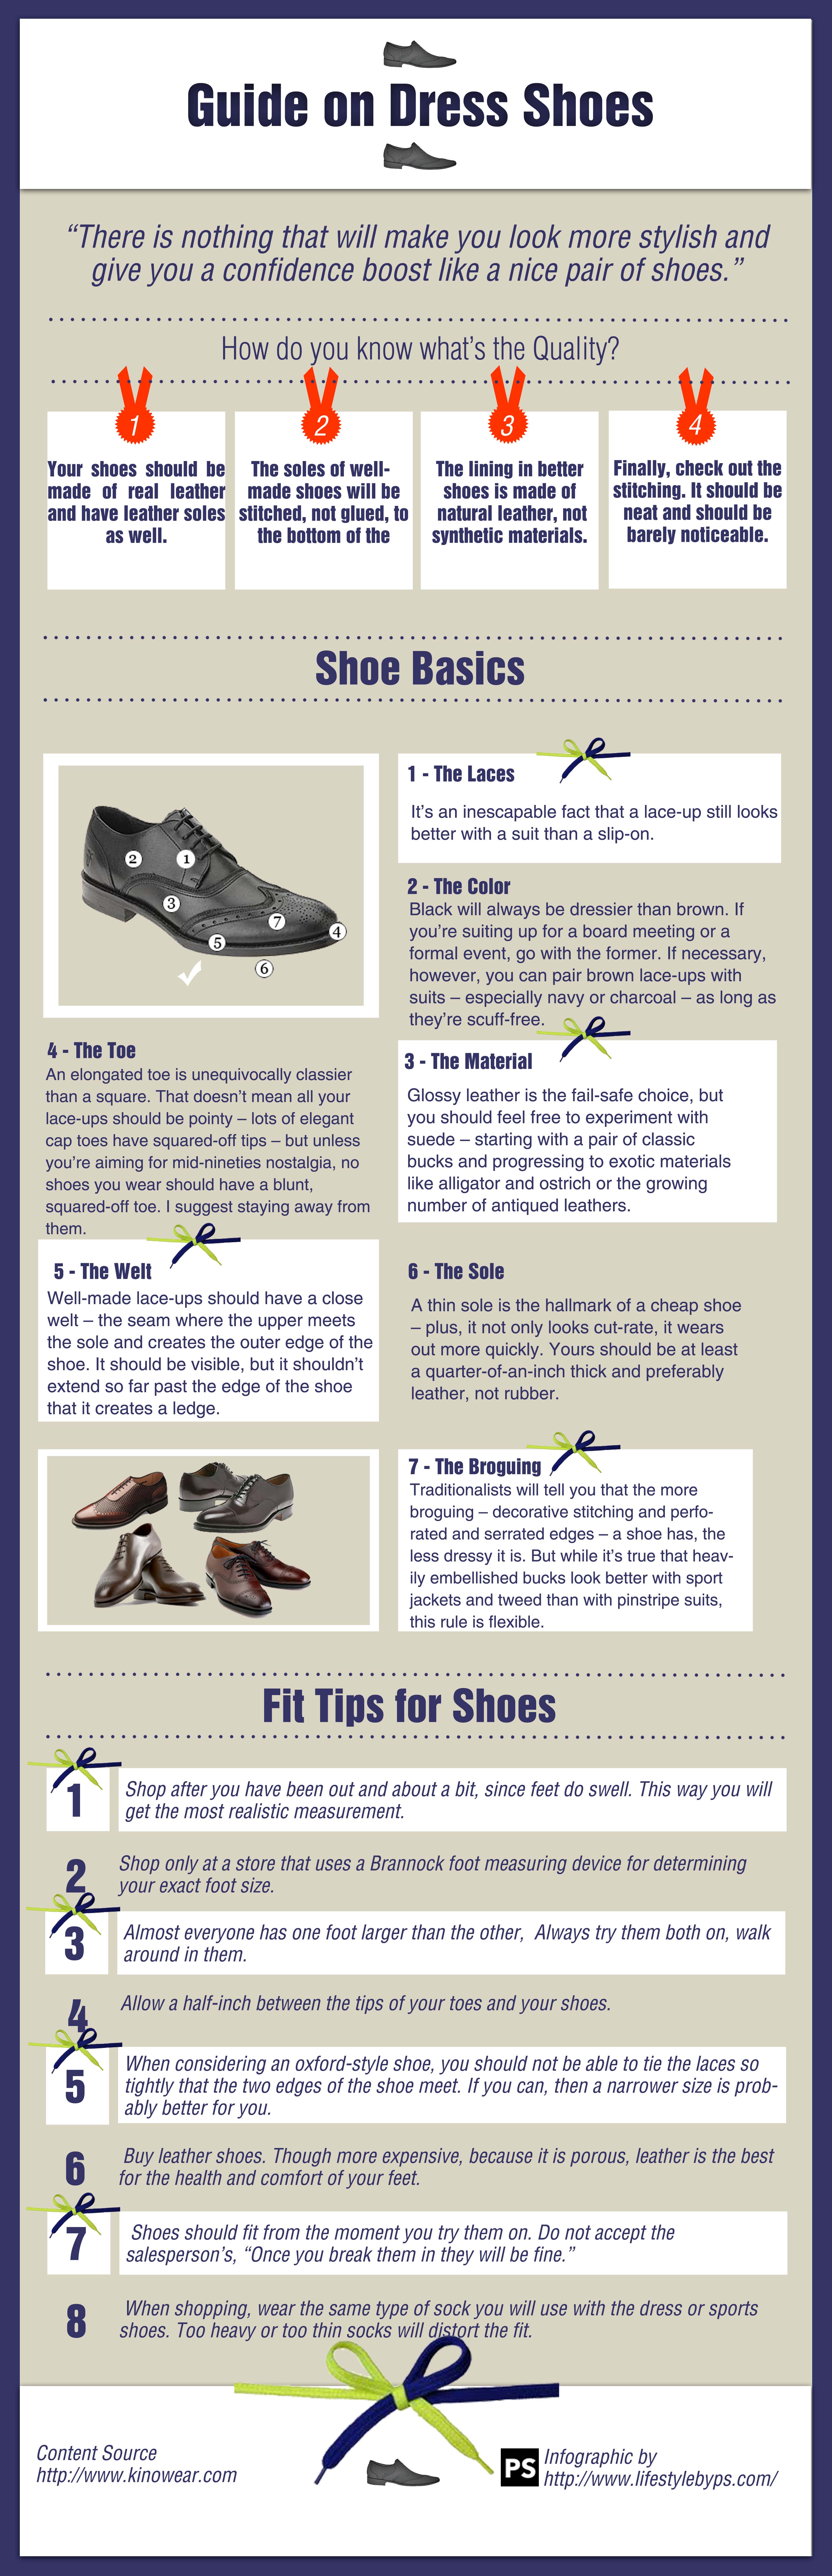 A Guide on Dress Shoes - Infographic